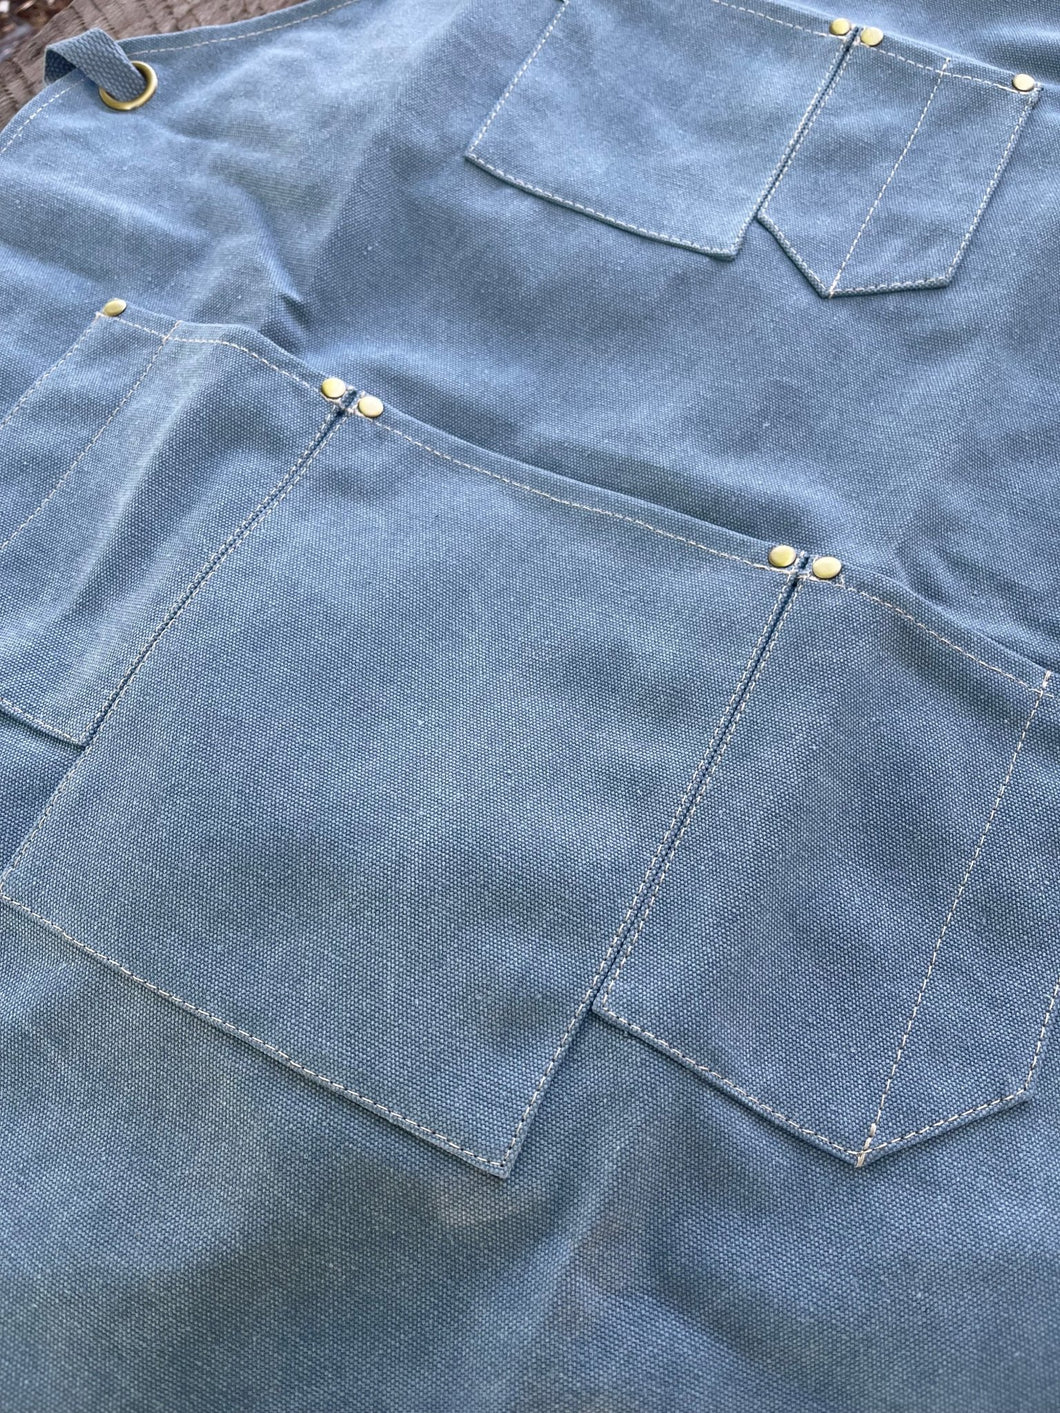 Canvas Apron - Waxed Canvas with Pockets